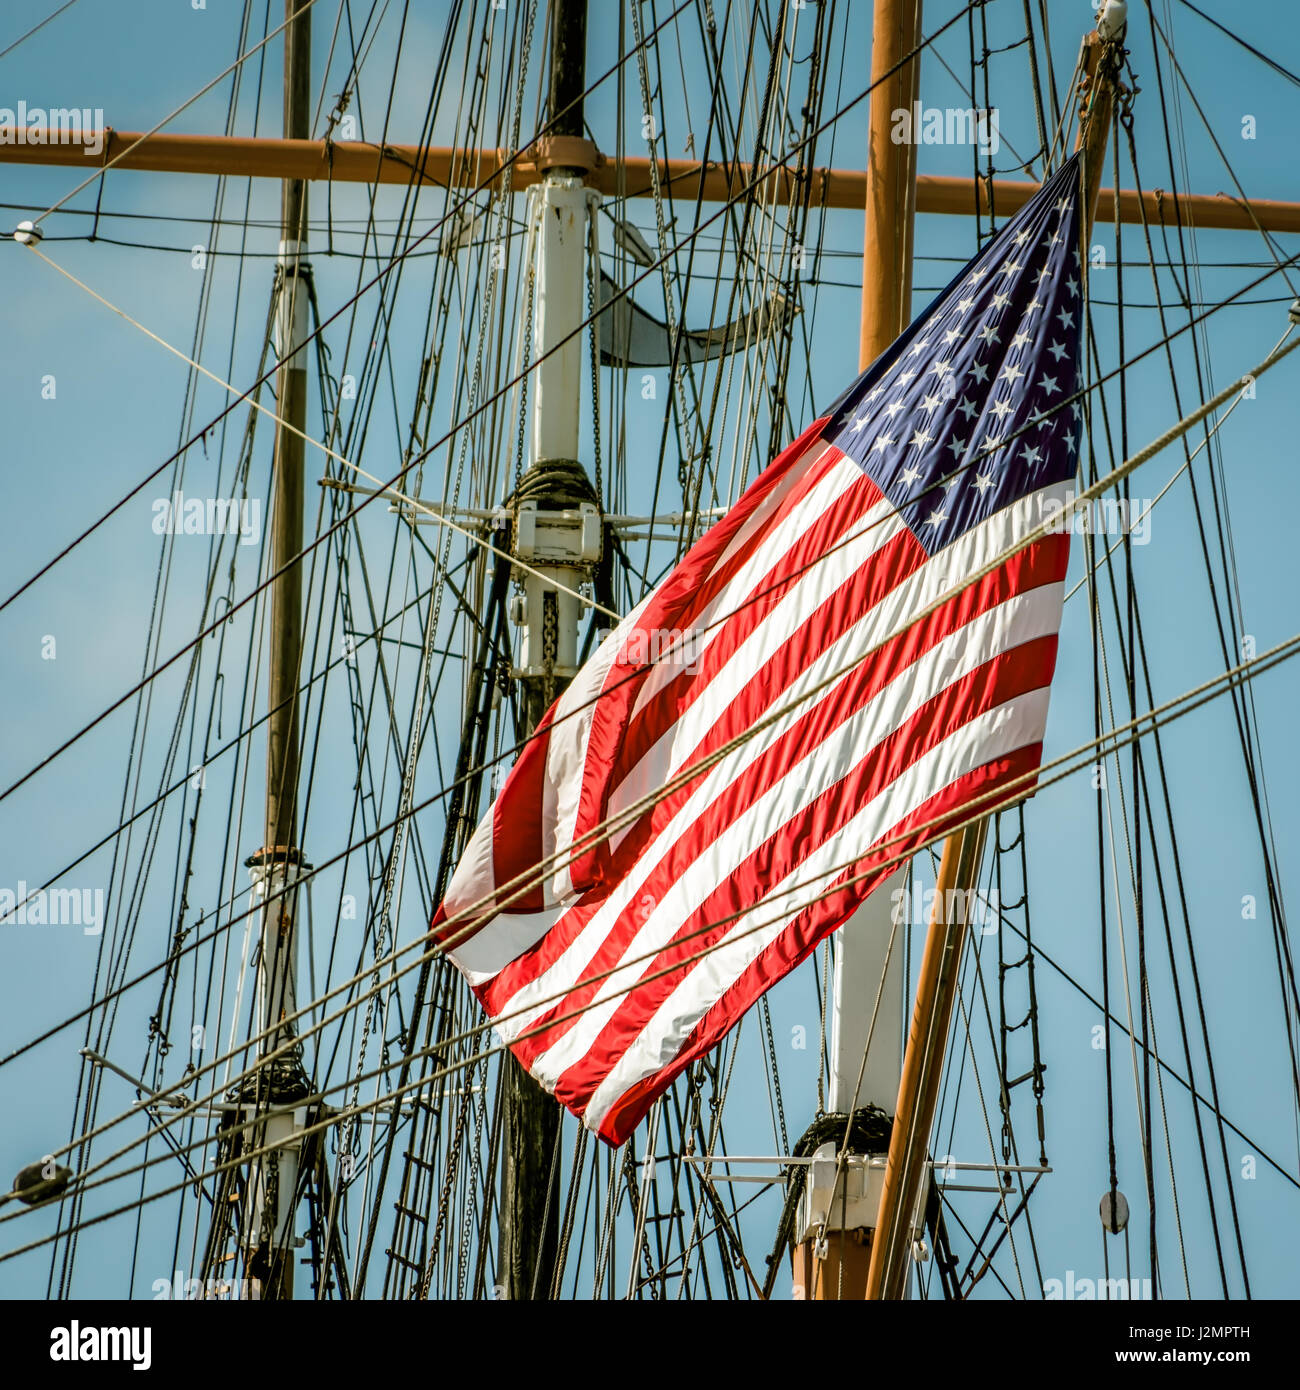 A flag on the back of a sailing ship in southern California. Stock Photo